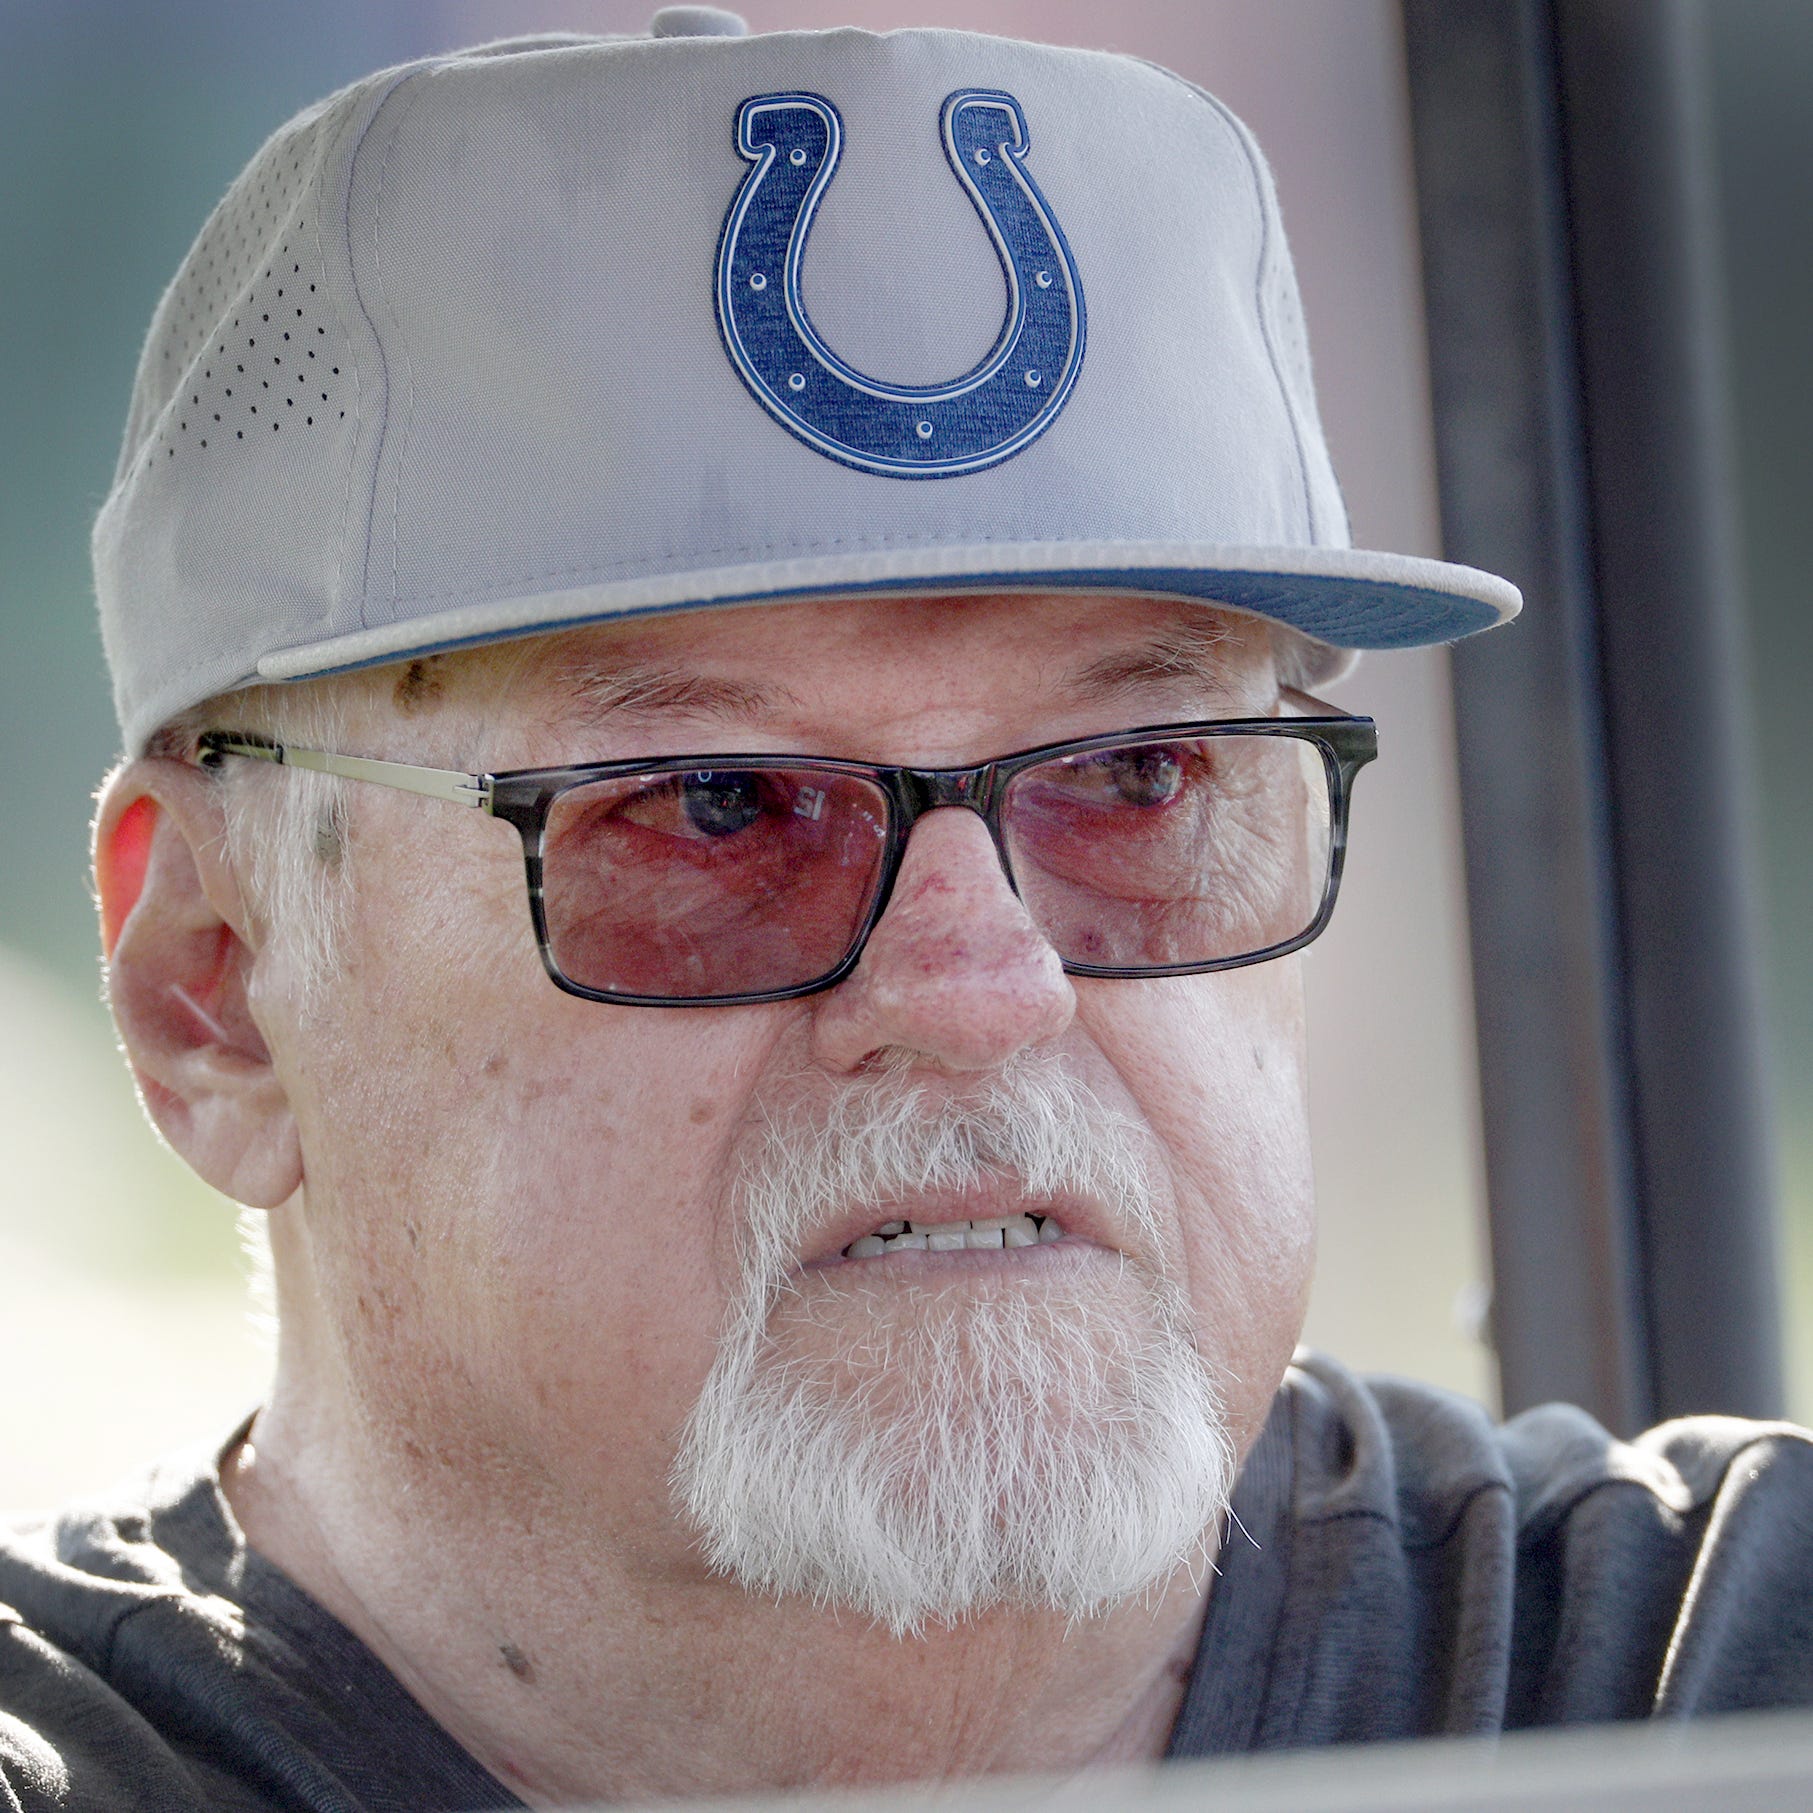 Indianapolis Colts play-by-play voice Bob Lamey during their seventh day of training camp at Grand Park in Westfield on Thursday, August 2, 2018. Lamey will retire after 31 seasons.